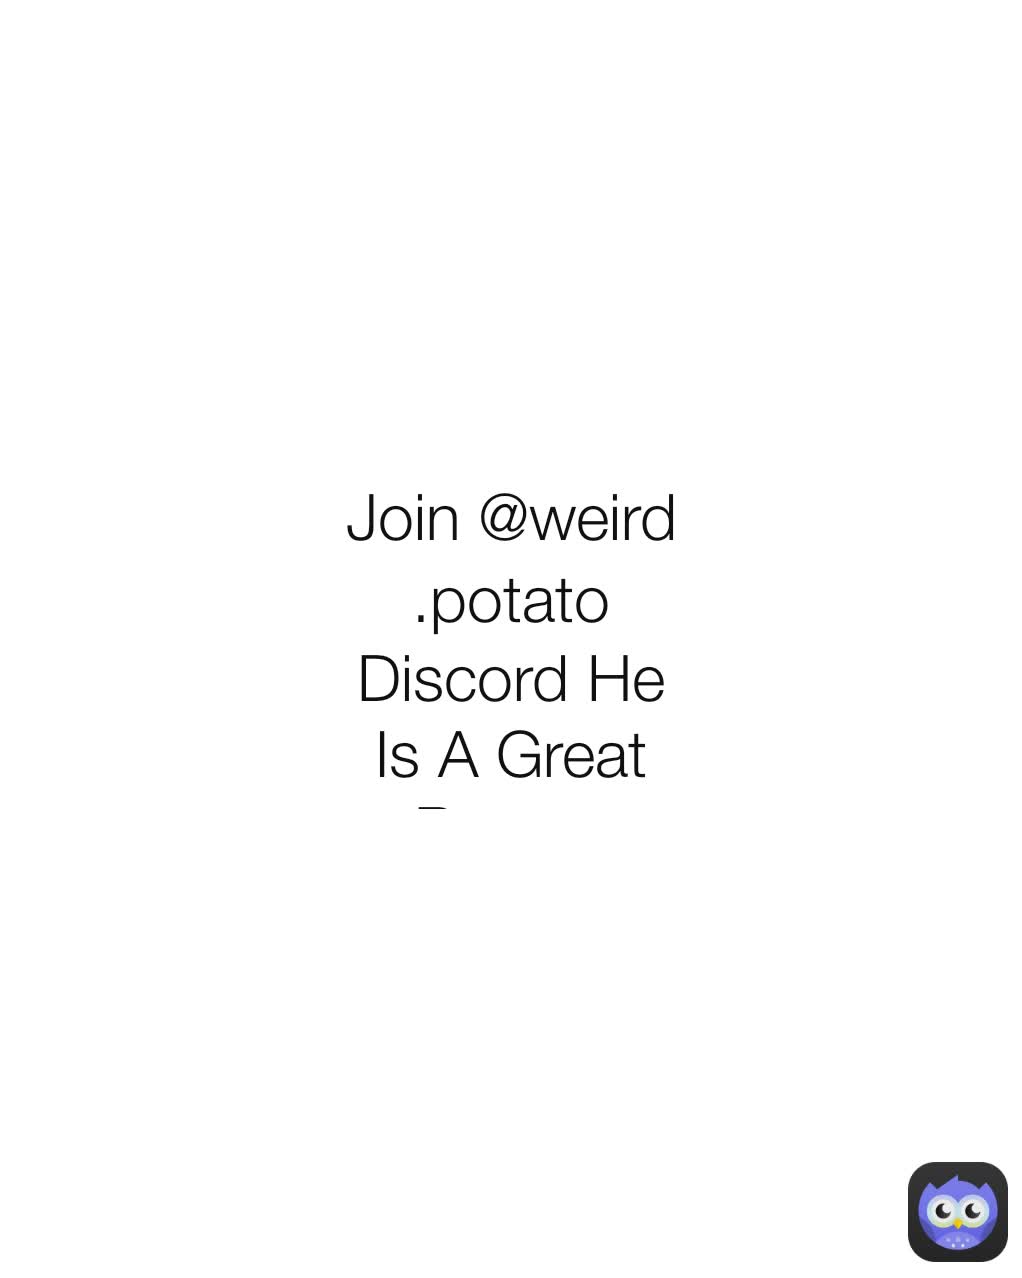 Join @weird.potato
Discord He Is A Great Person